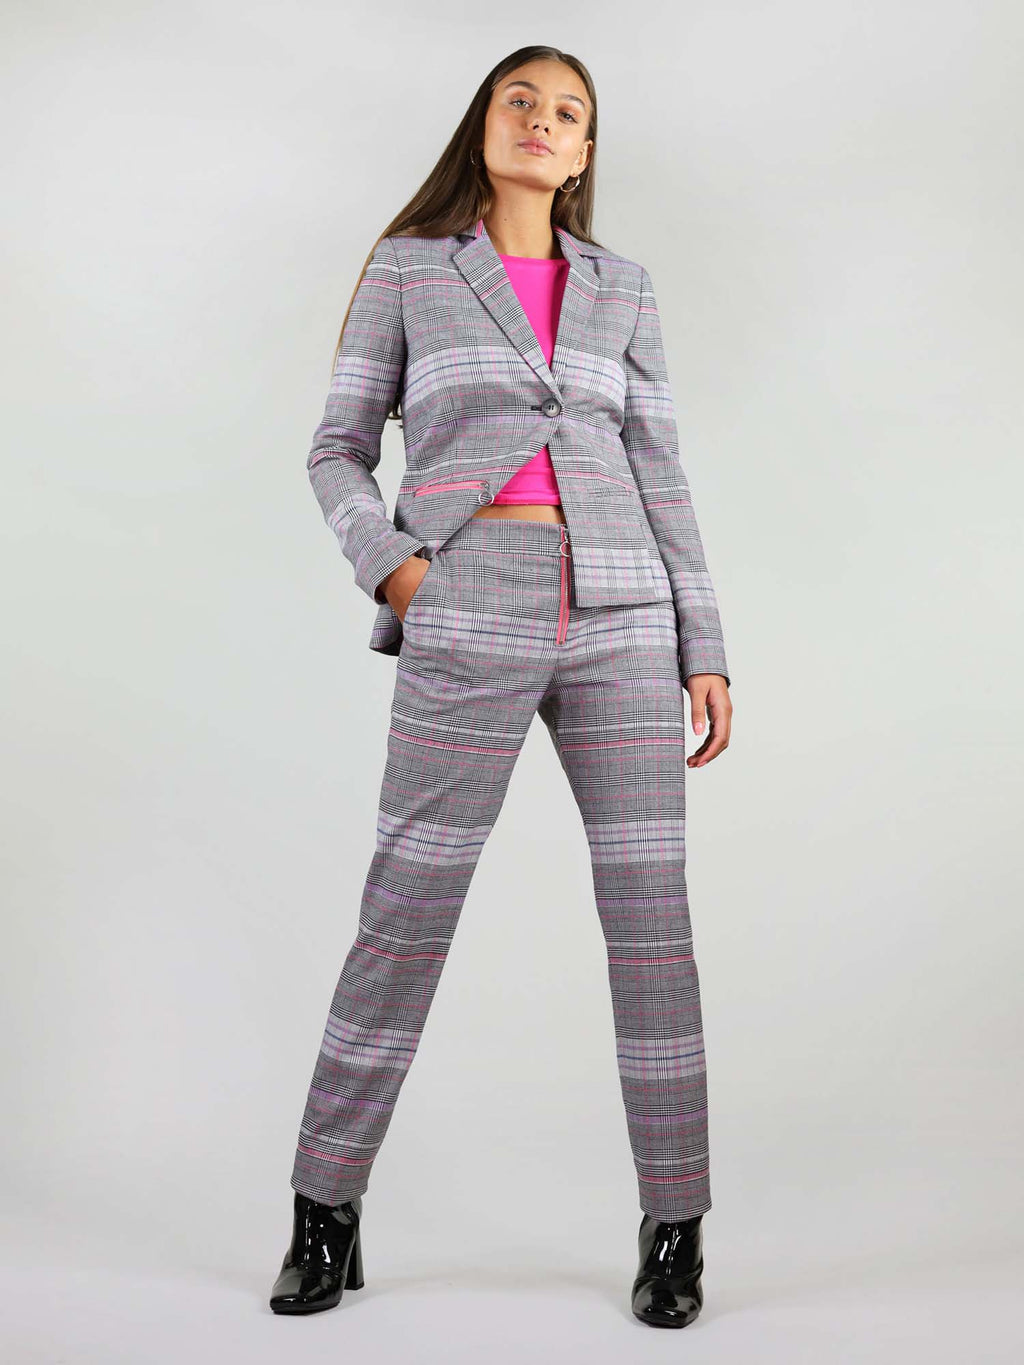 The revivify trousers come in grey and pink checker fabric and bright pink details. They are straight leg fit and have two slant pockets.